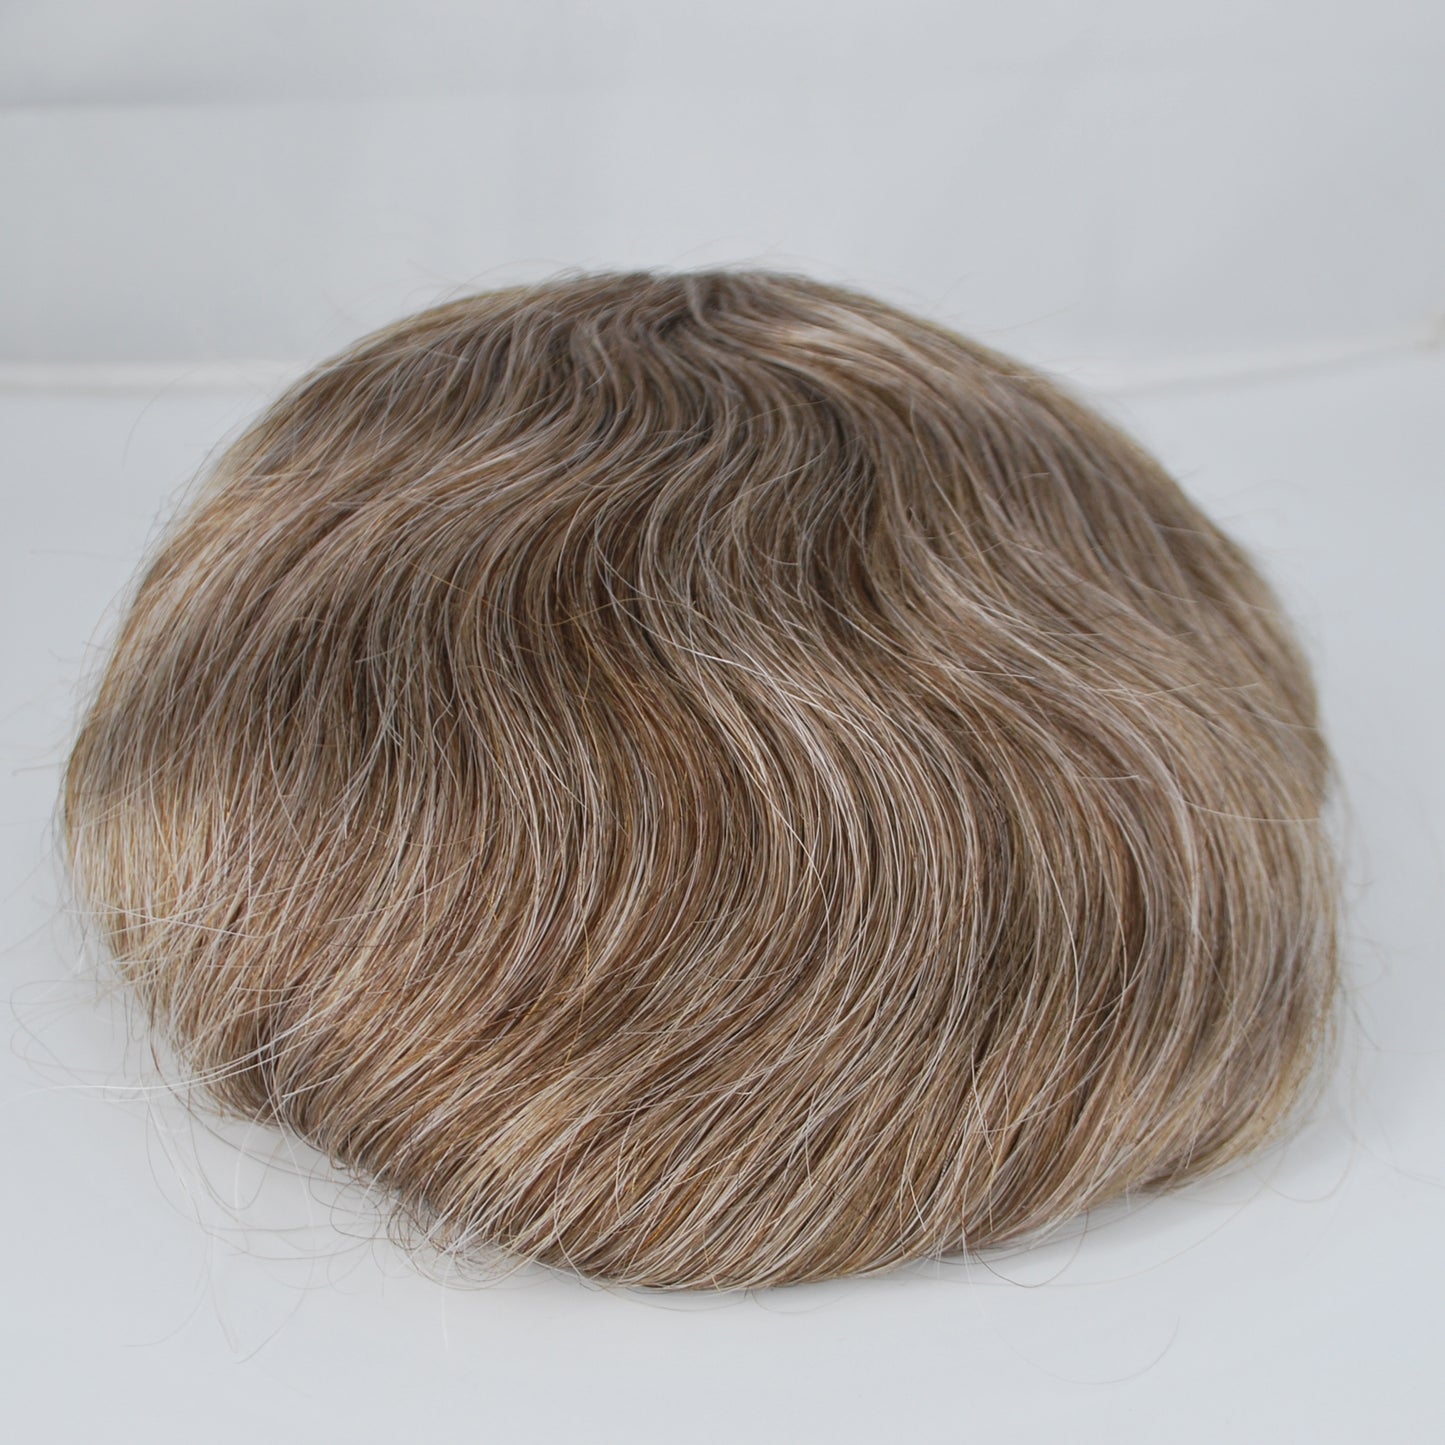 Clearance toupee for men #7 mixed 45% grey french lace with PU back and sides men hair system